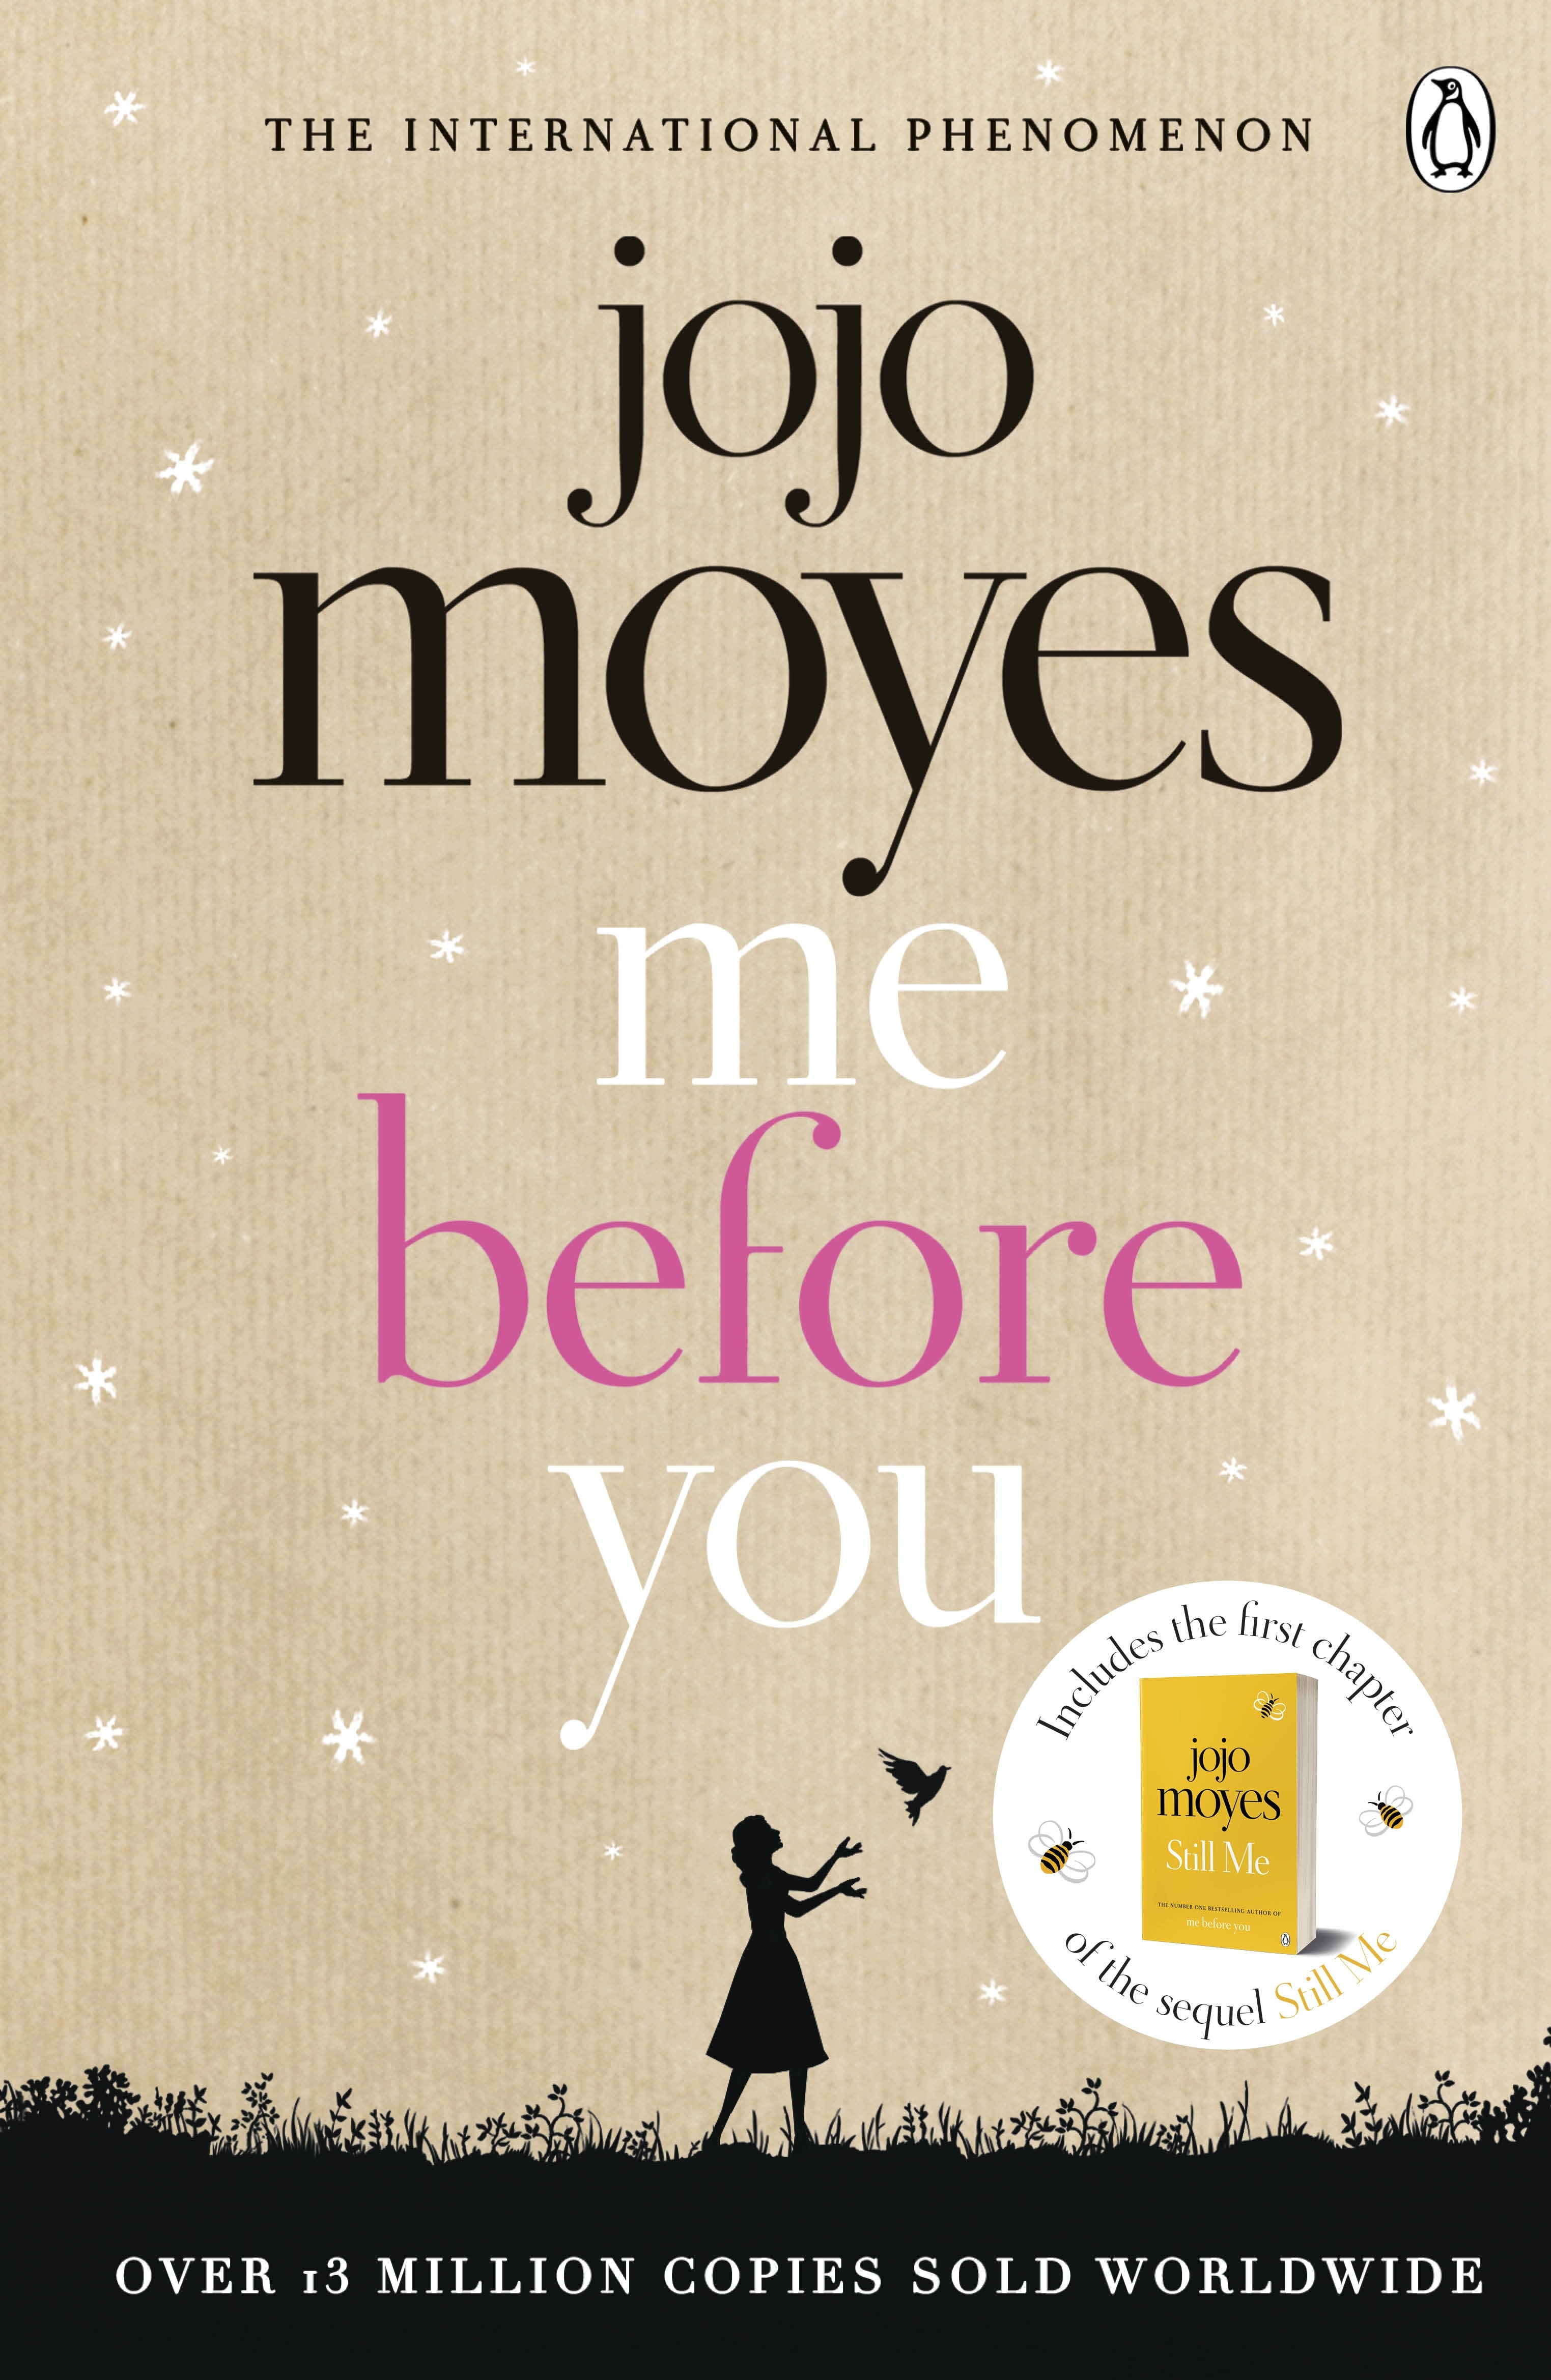 Book “Me Before You” by Jojo Moyes — January 5, 2012